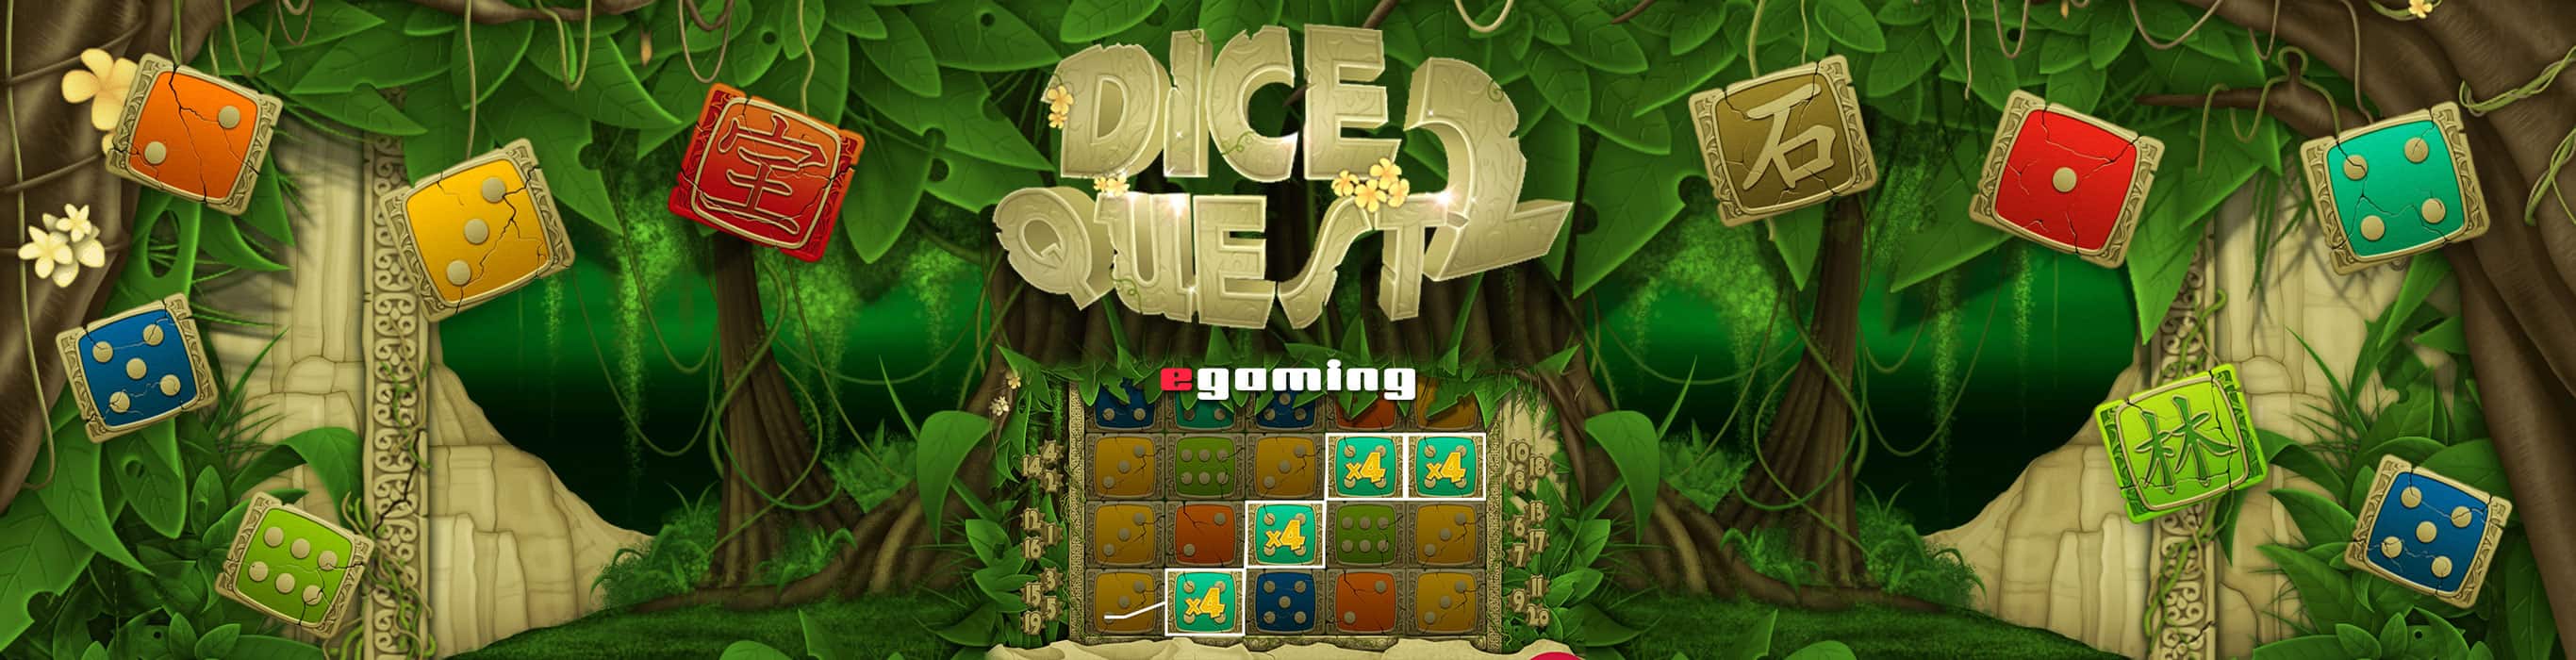 dicequest2-36win-banner-2732x700